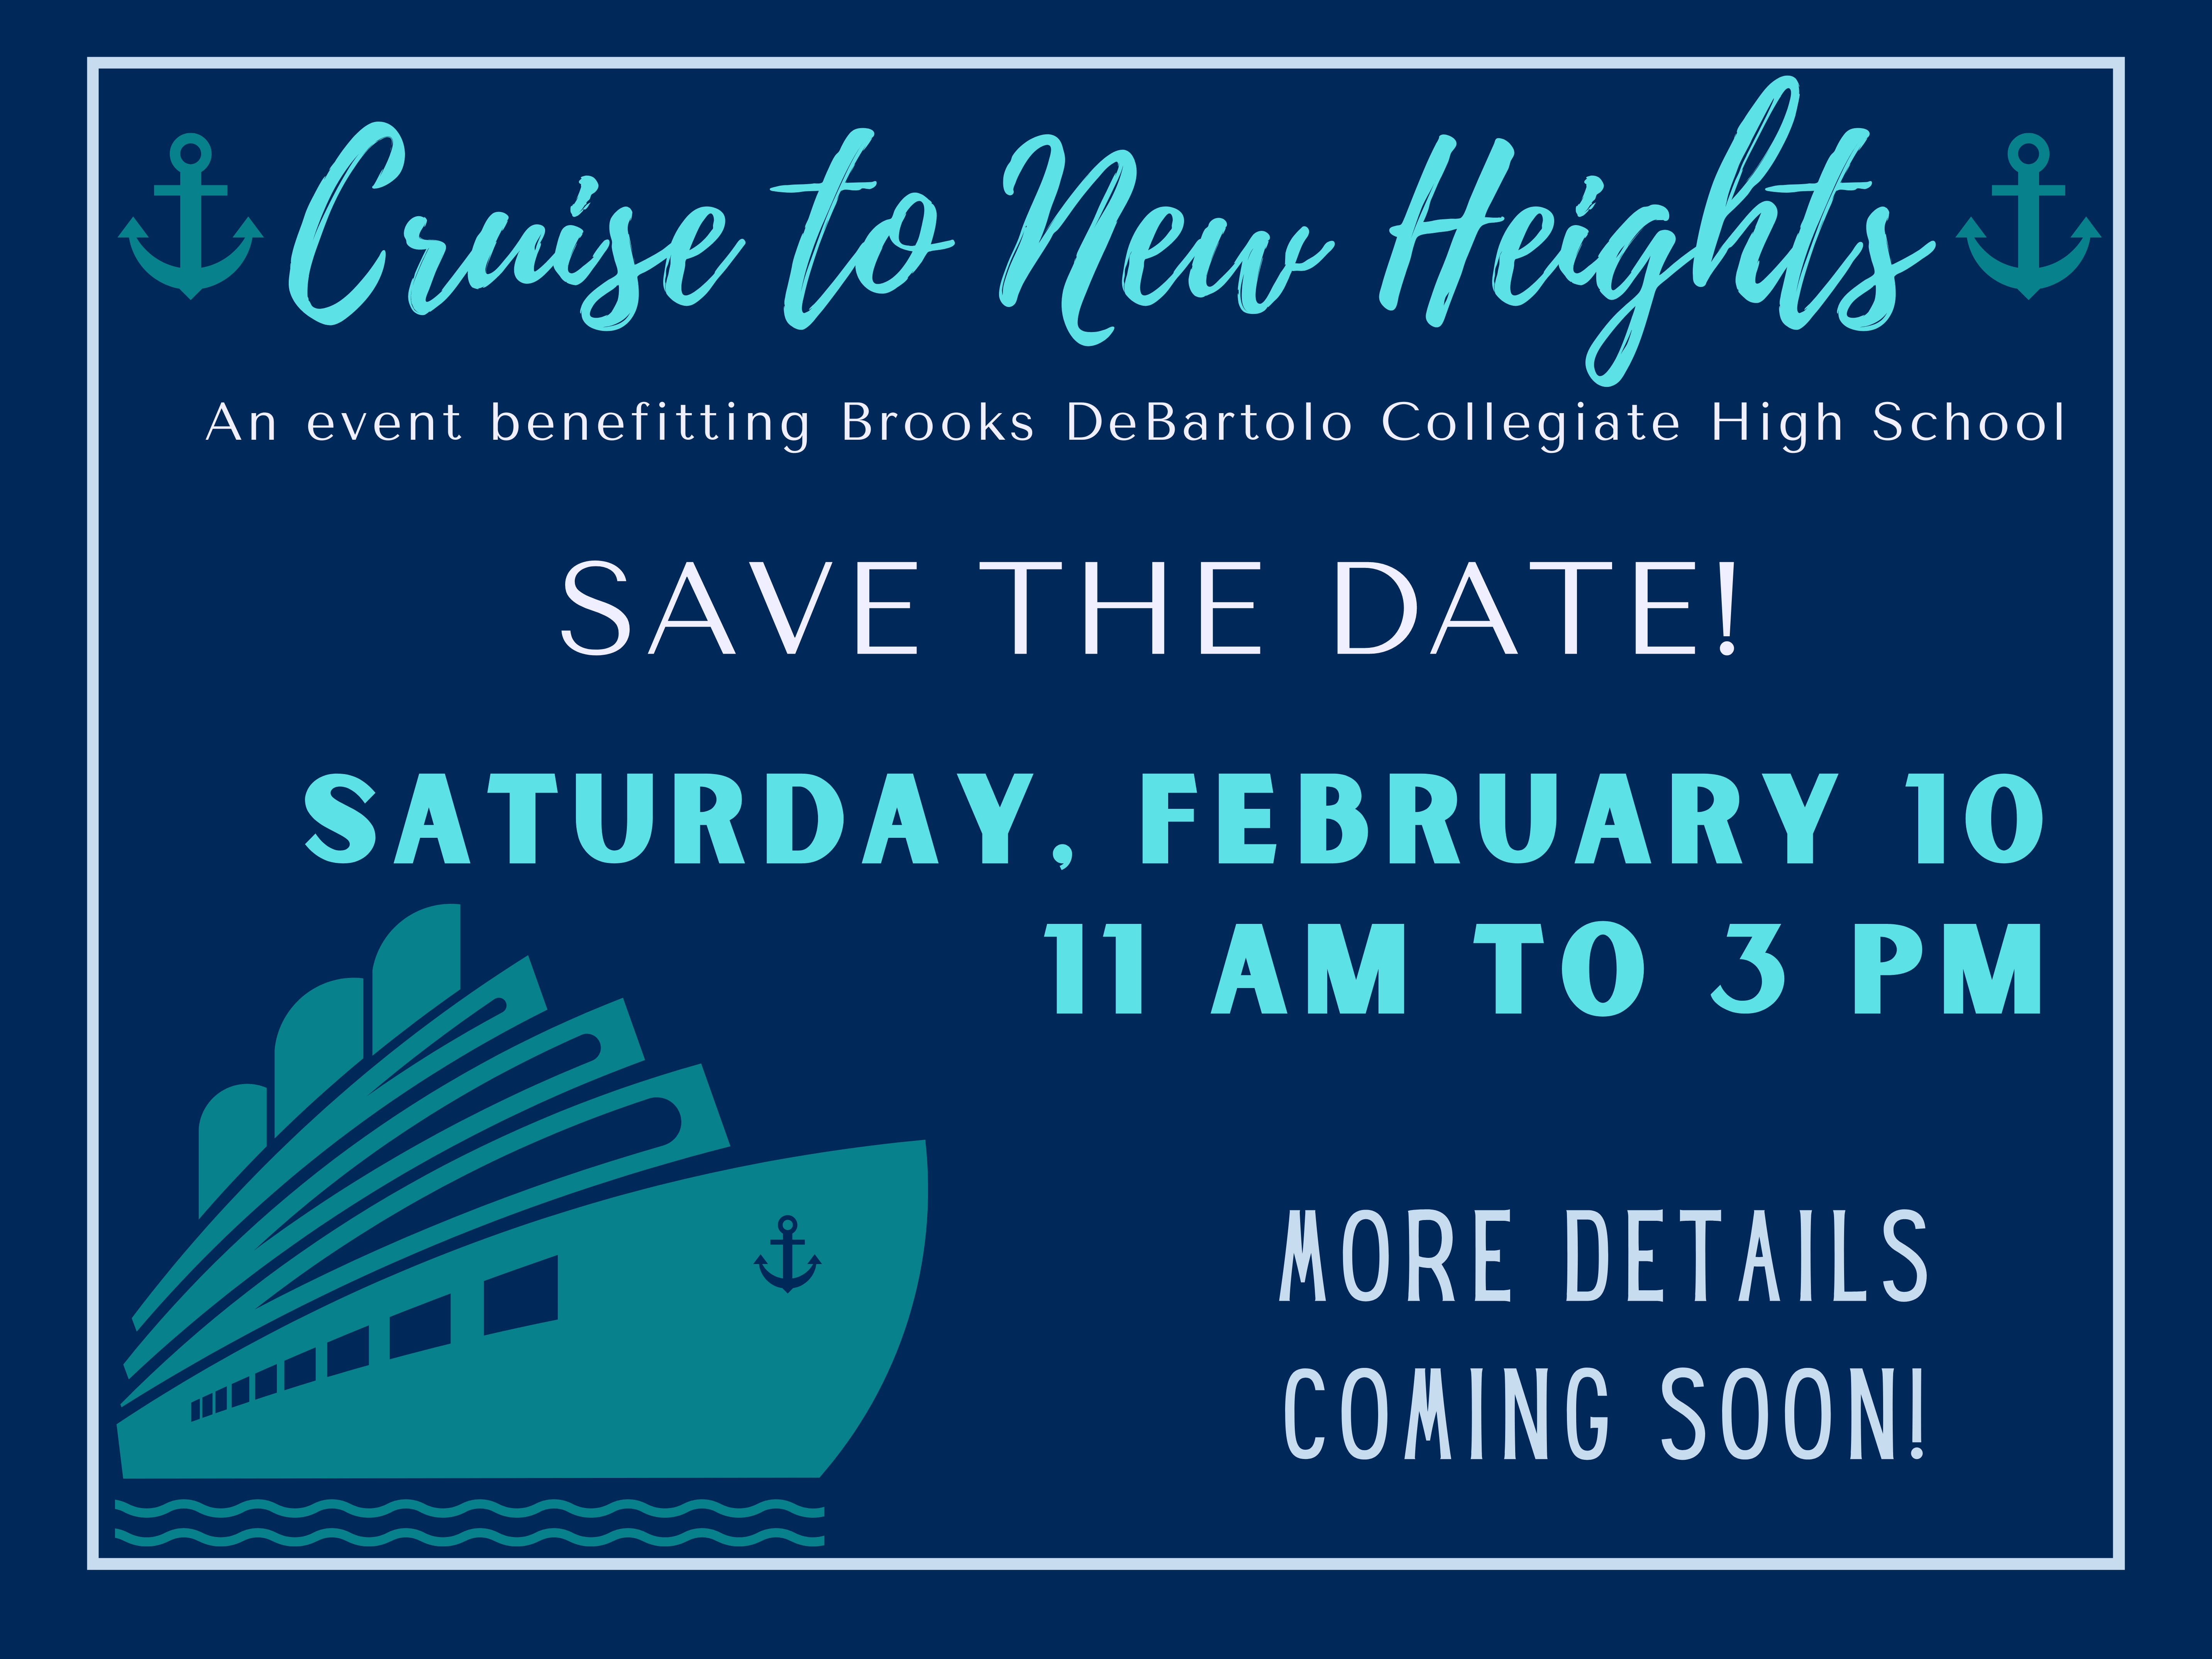 Cruise To New Heights